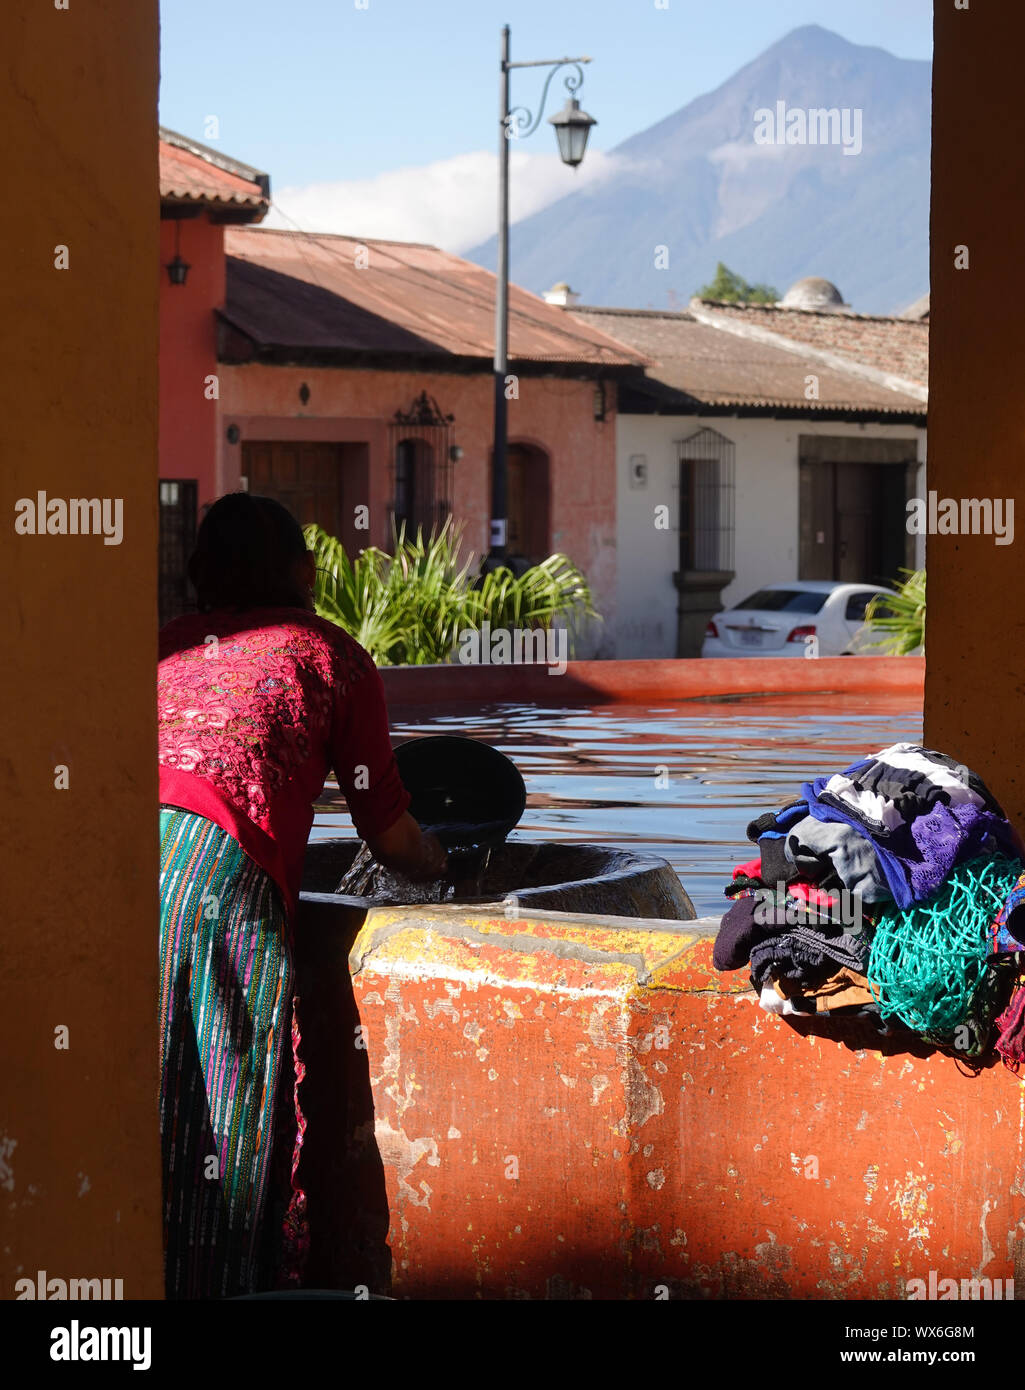 Doing laundry the ancient way and with a volcano view in Antigua, Guatemala Stock Photo